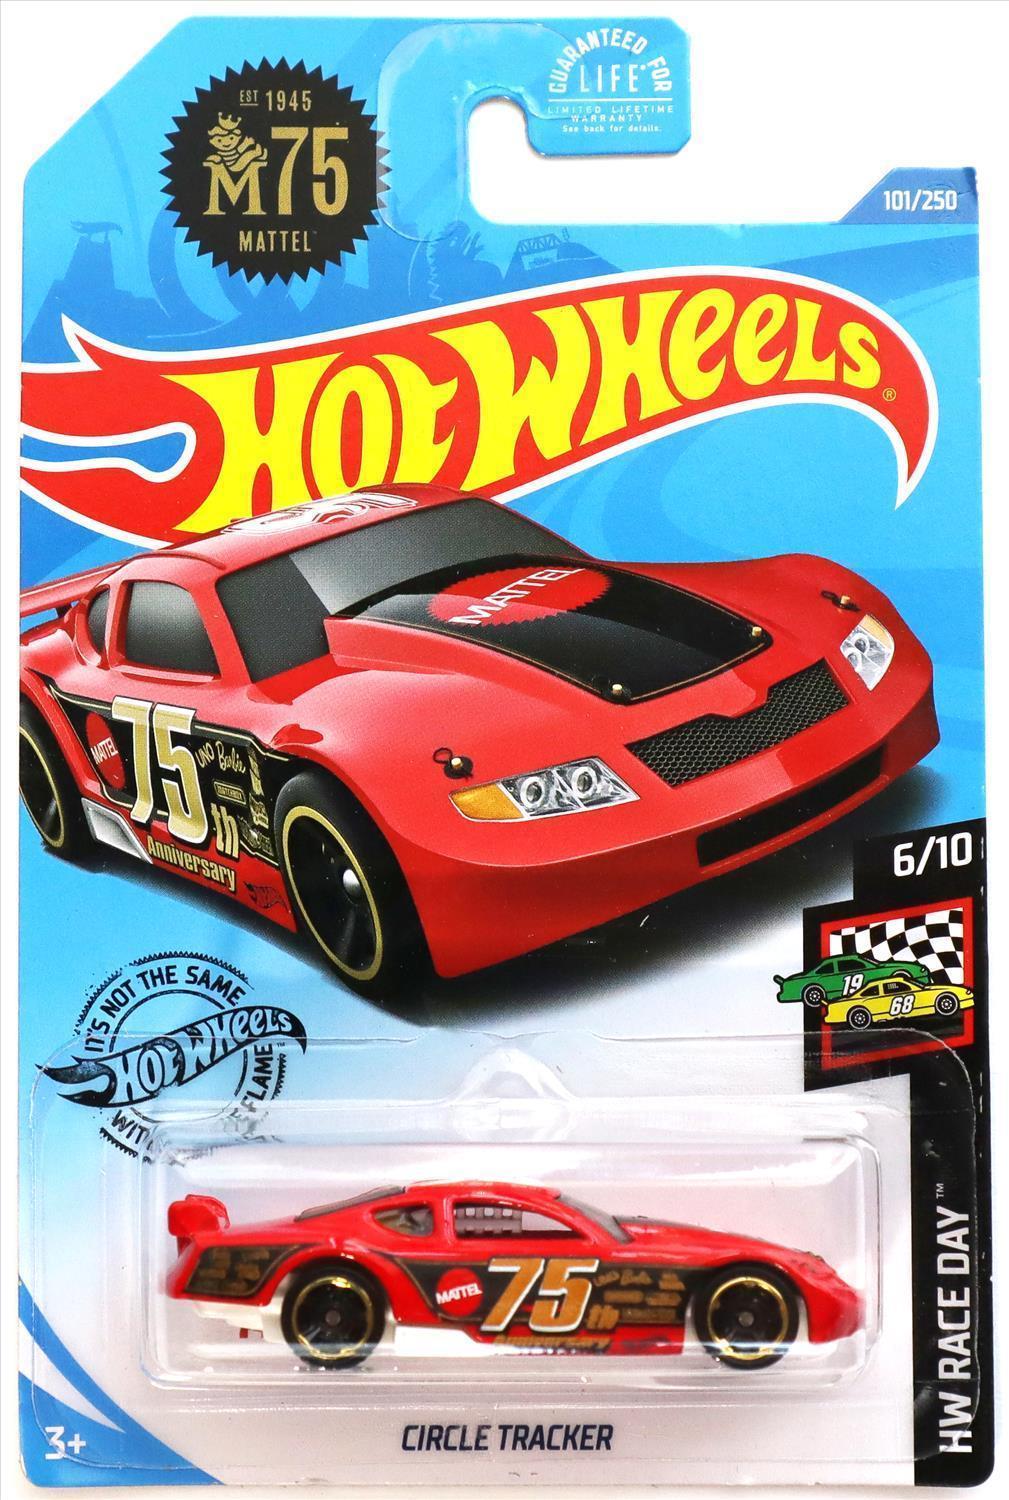 Hot Wheels 2020 - Collector # 101/250 - HW Race Day 6/10 - Circle Tracker - Red - USA Card with Mattel 75th Anniversary